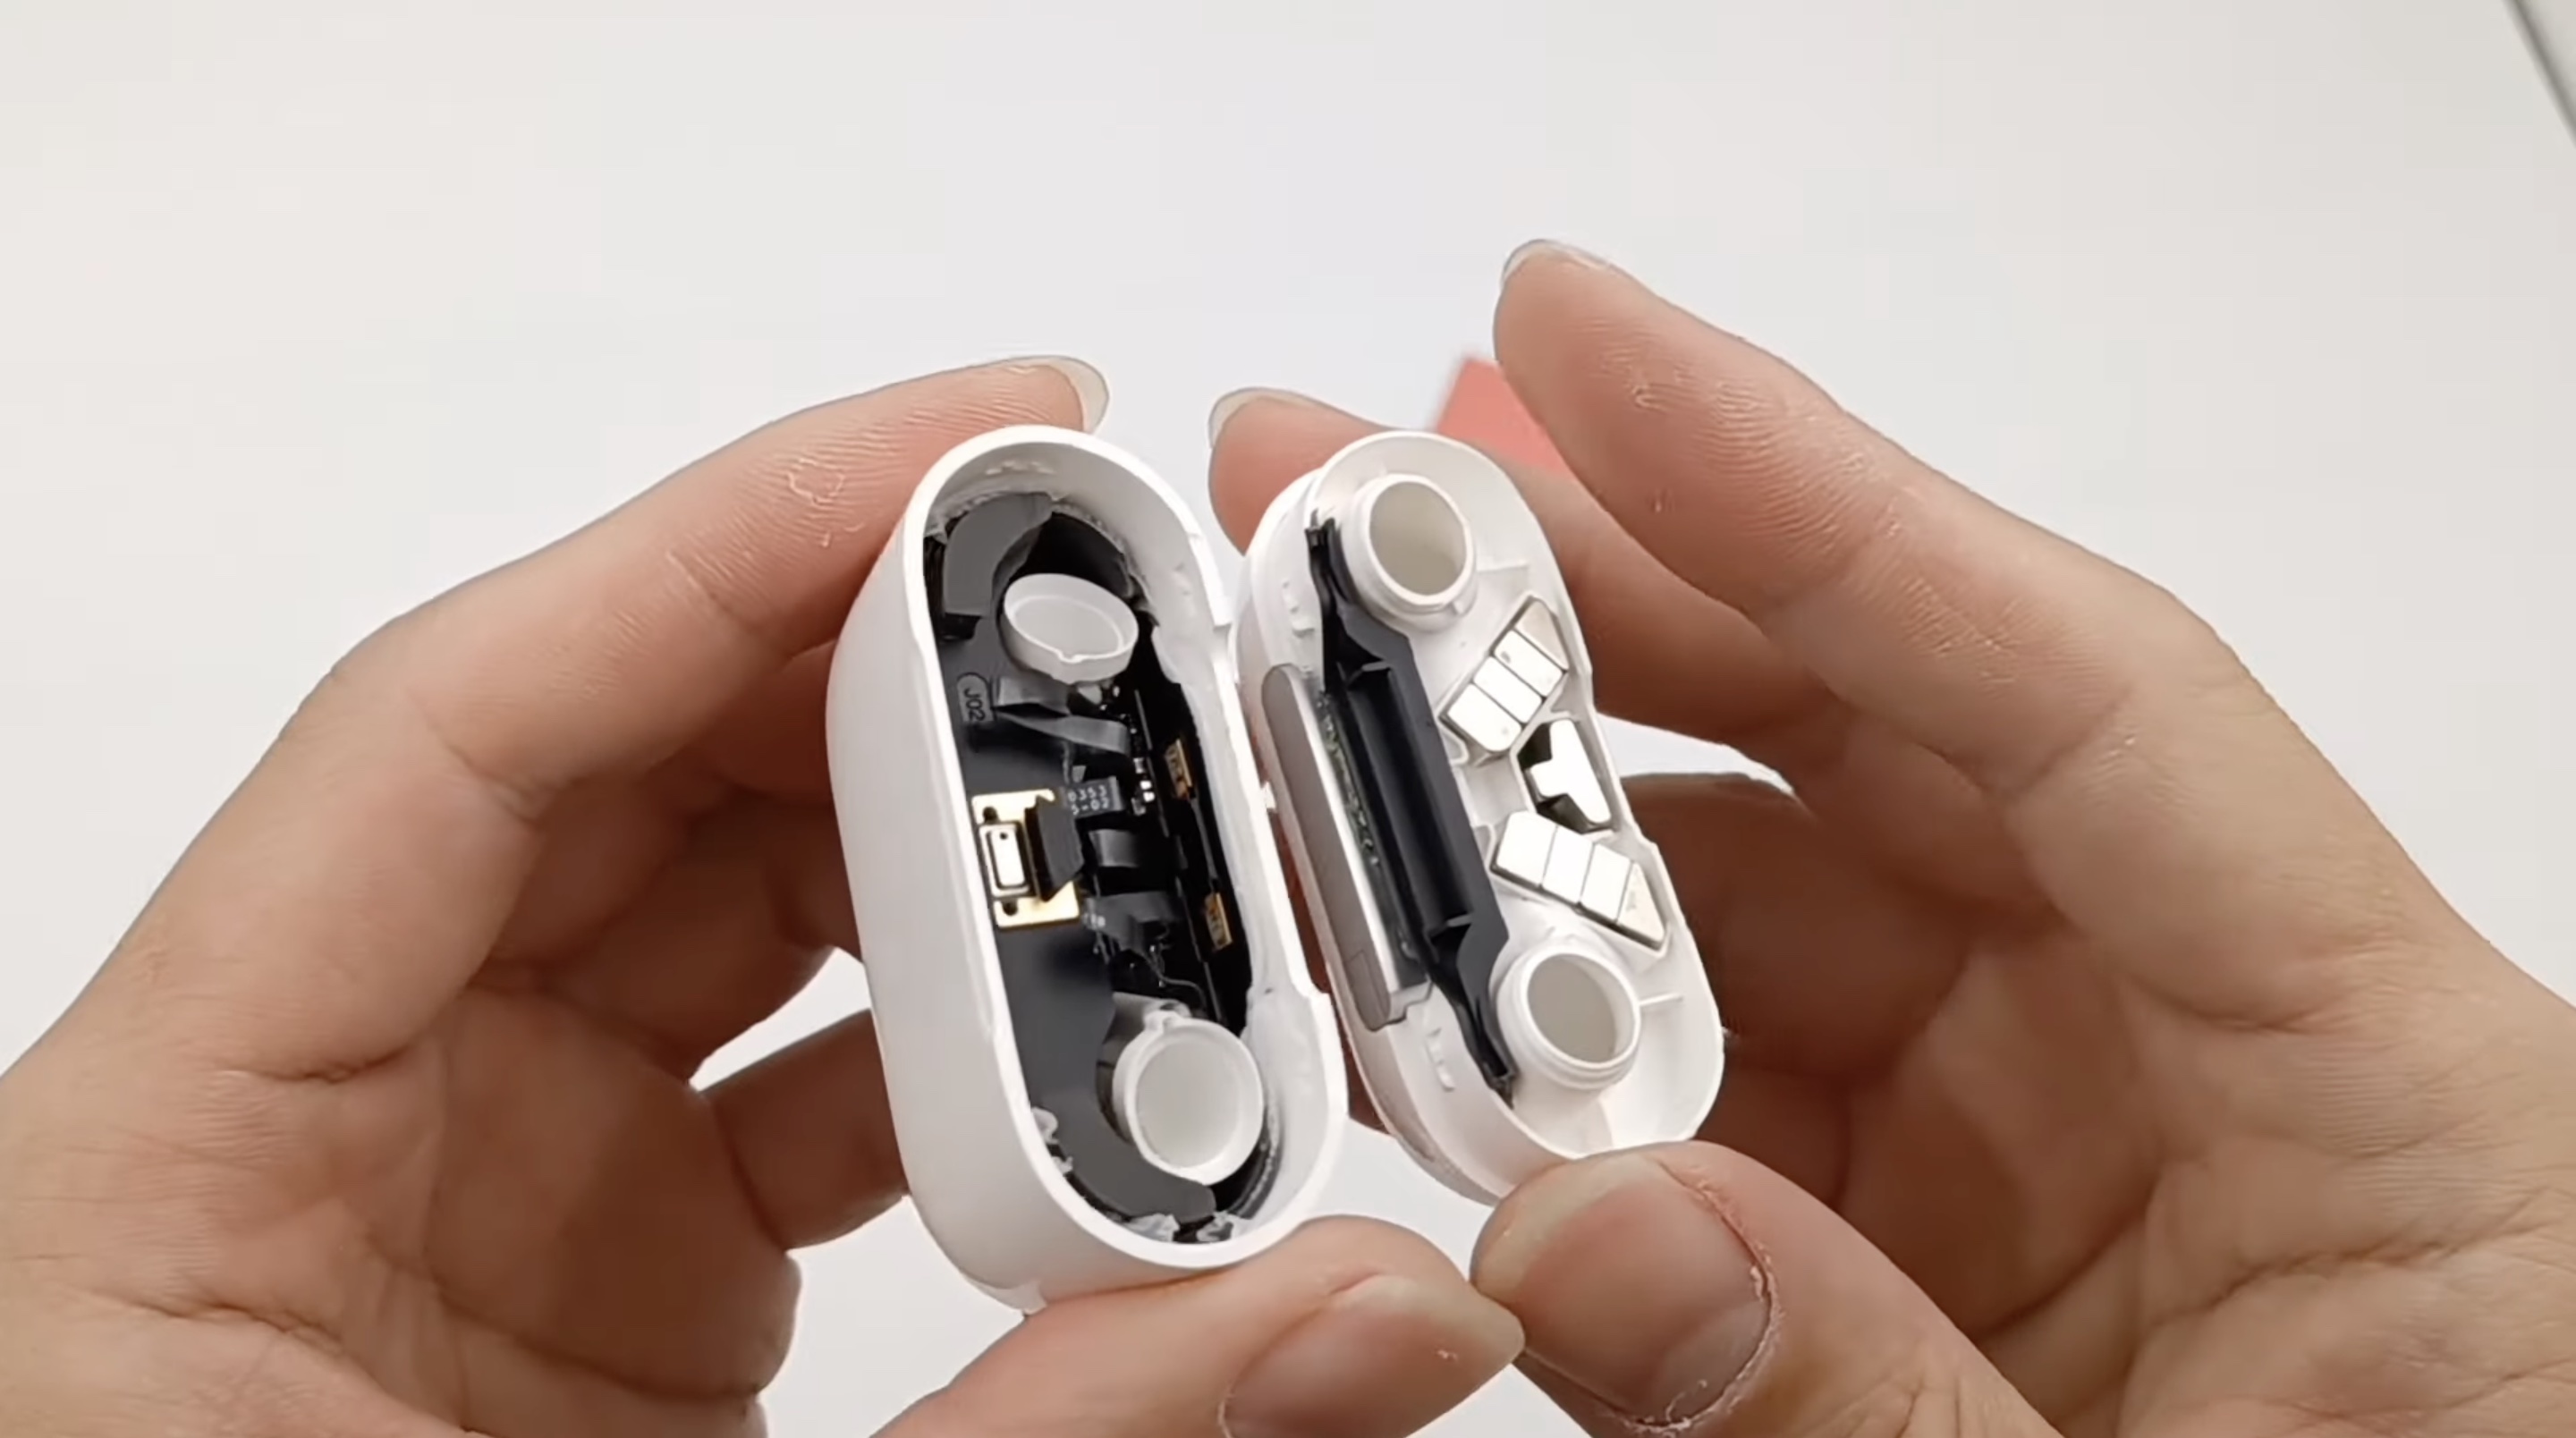 Airpods 3 разница. AIRPODS Pro 2 MAGSAFE. Чип h1 AIRPODS. Чехол AIRPODS Pro 2 MAGSAFE. Наушники TWS Apple AIRPODS 3.